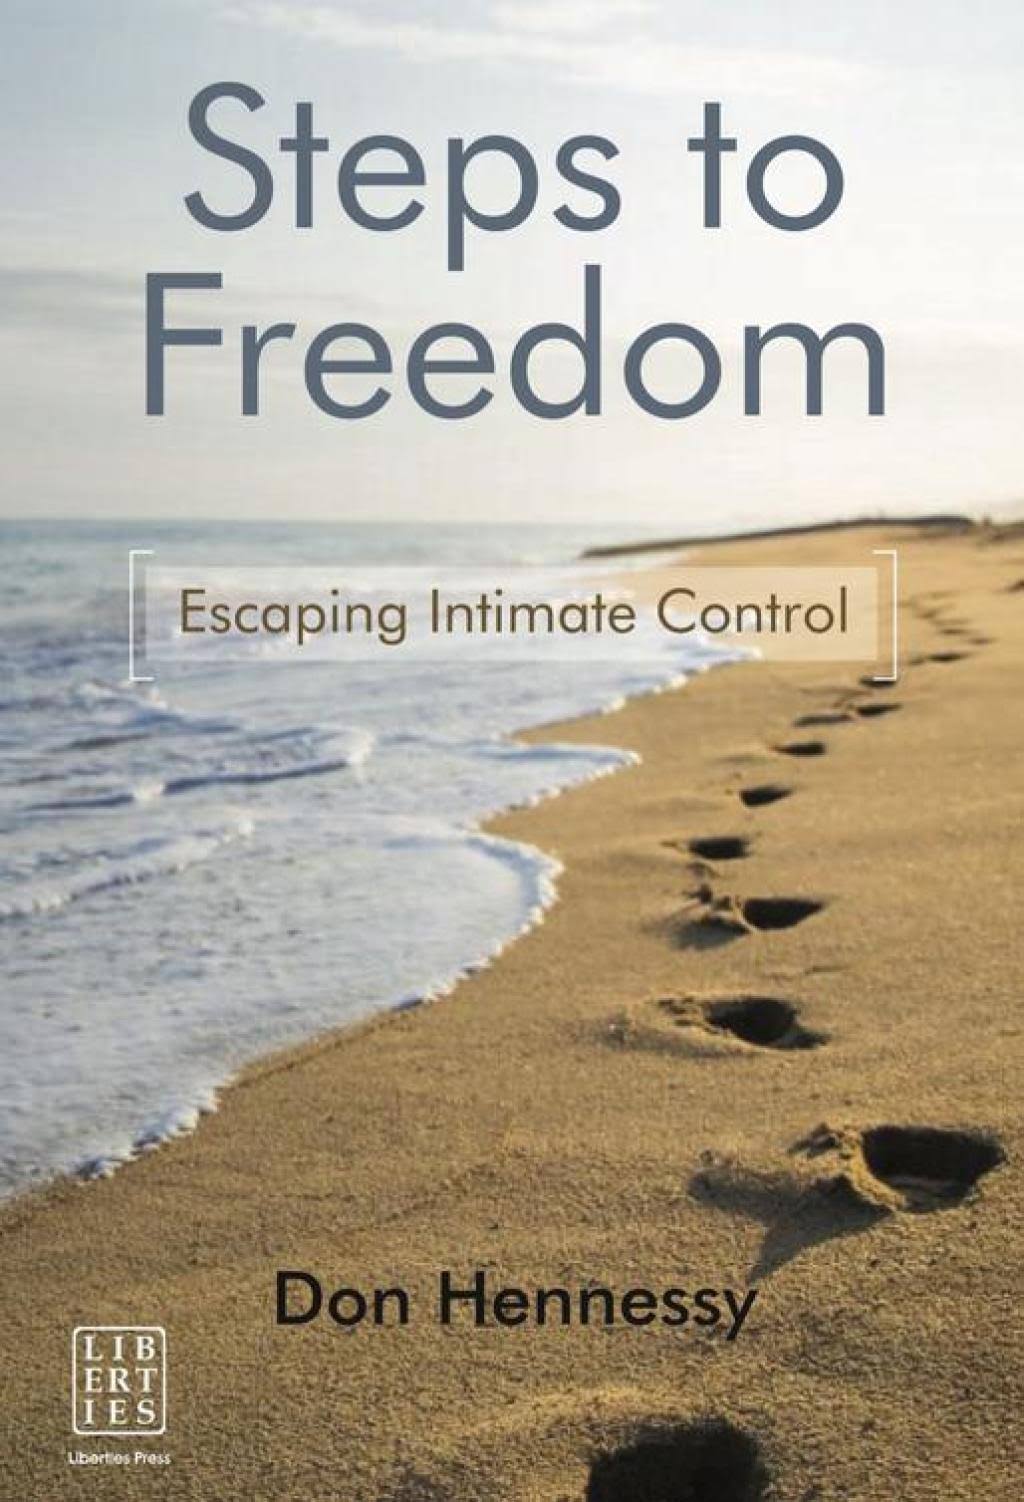 Steps to Freedom: Escaping Intimate Control [Book]